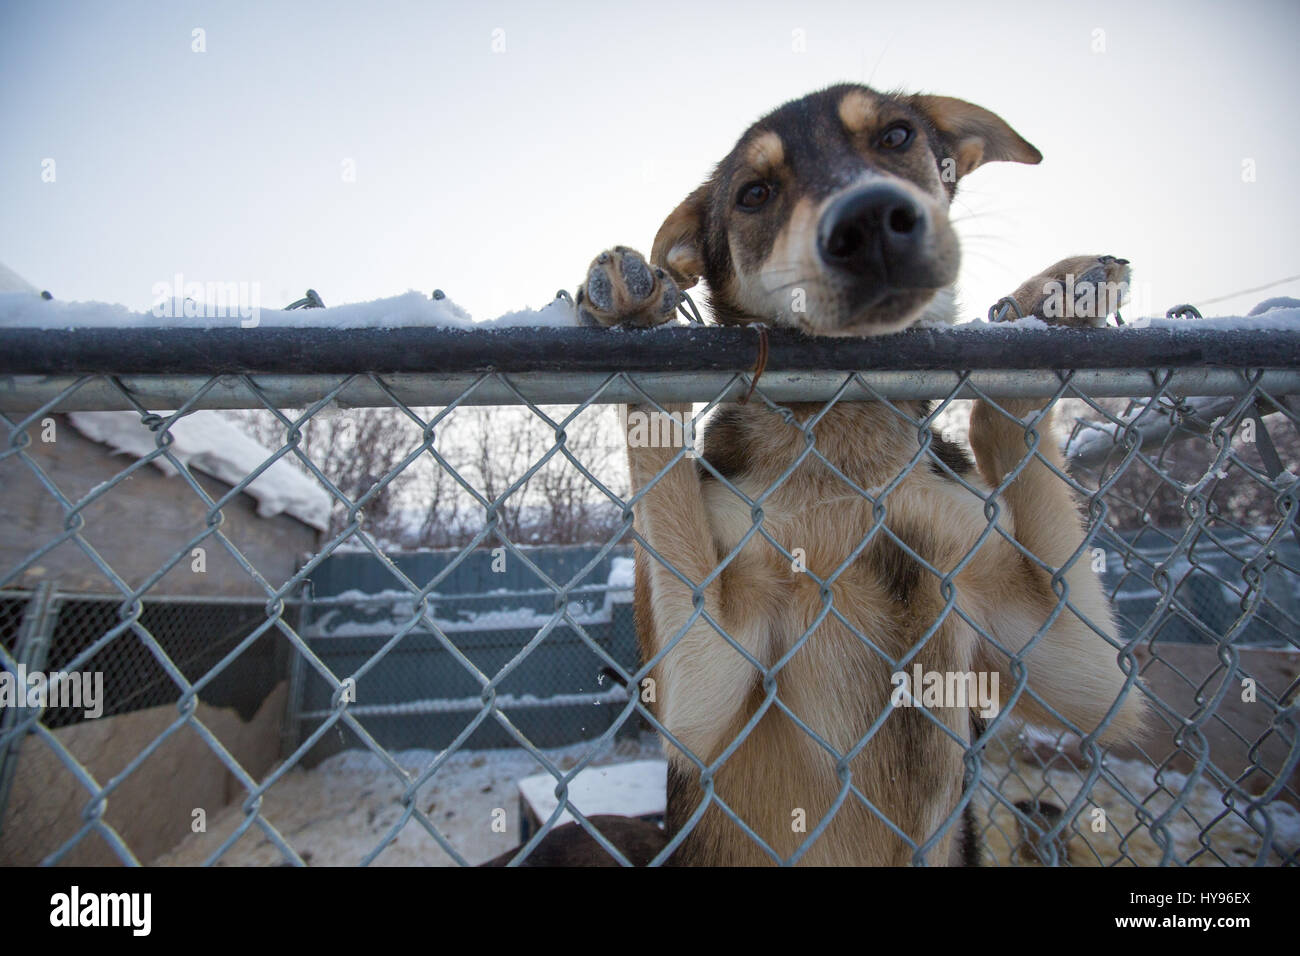 Cute shorthaired dog looking directly at camera, leaning up over a chain fence with both paws on it on a cold winter day Stock Photo